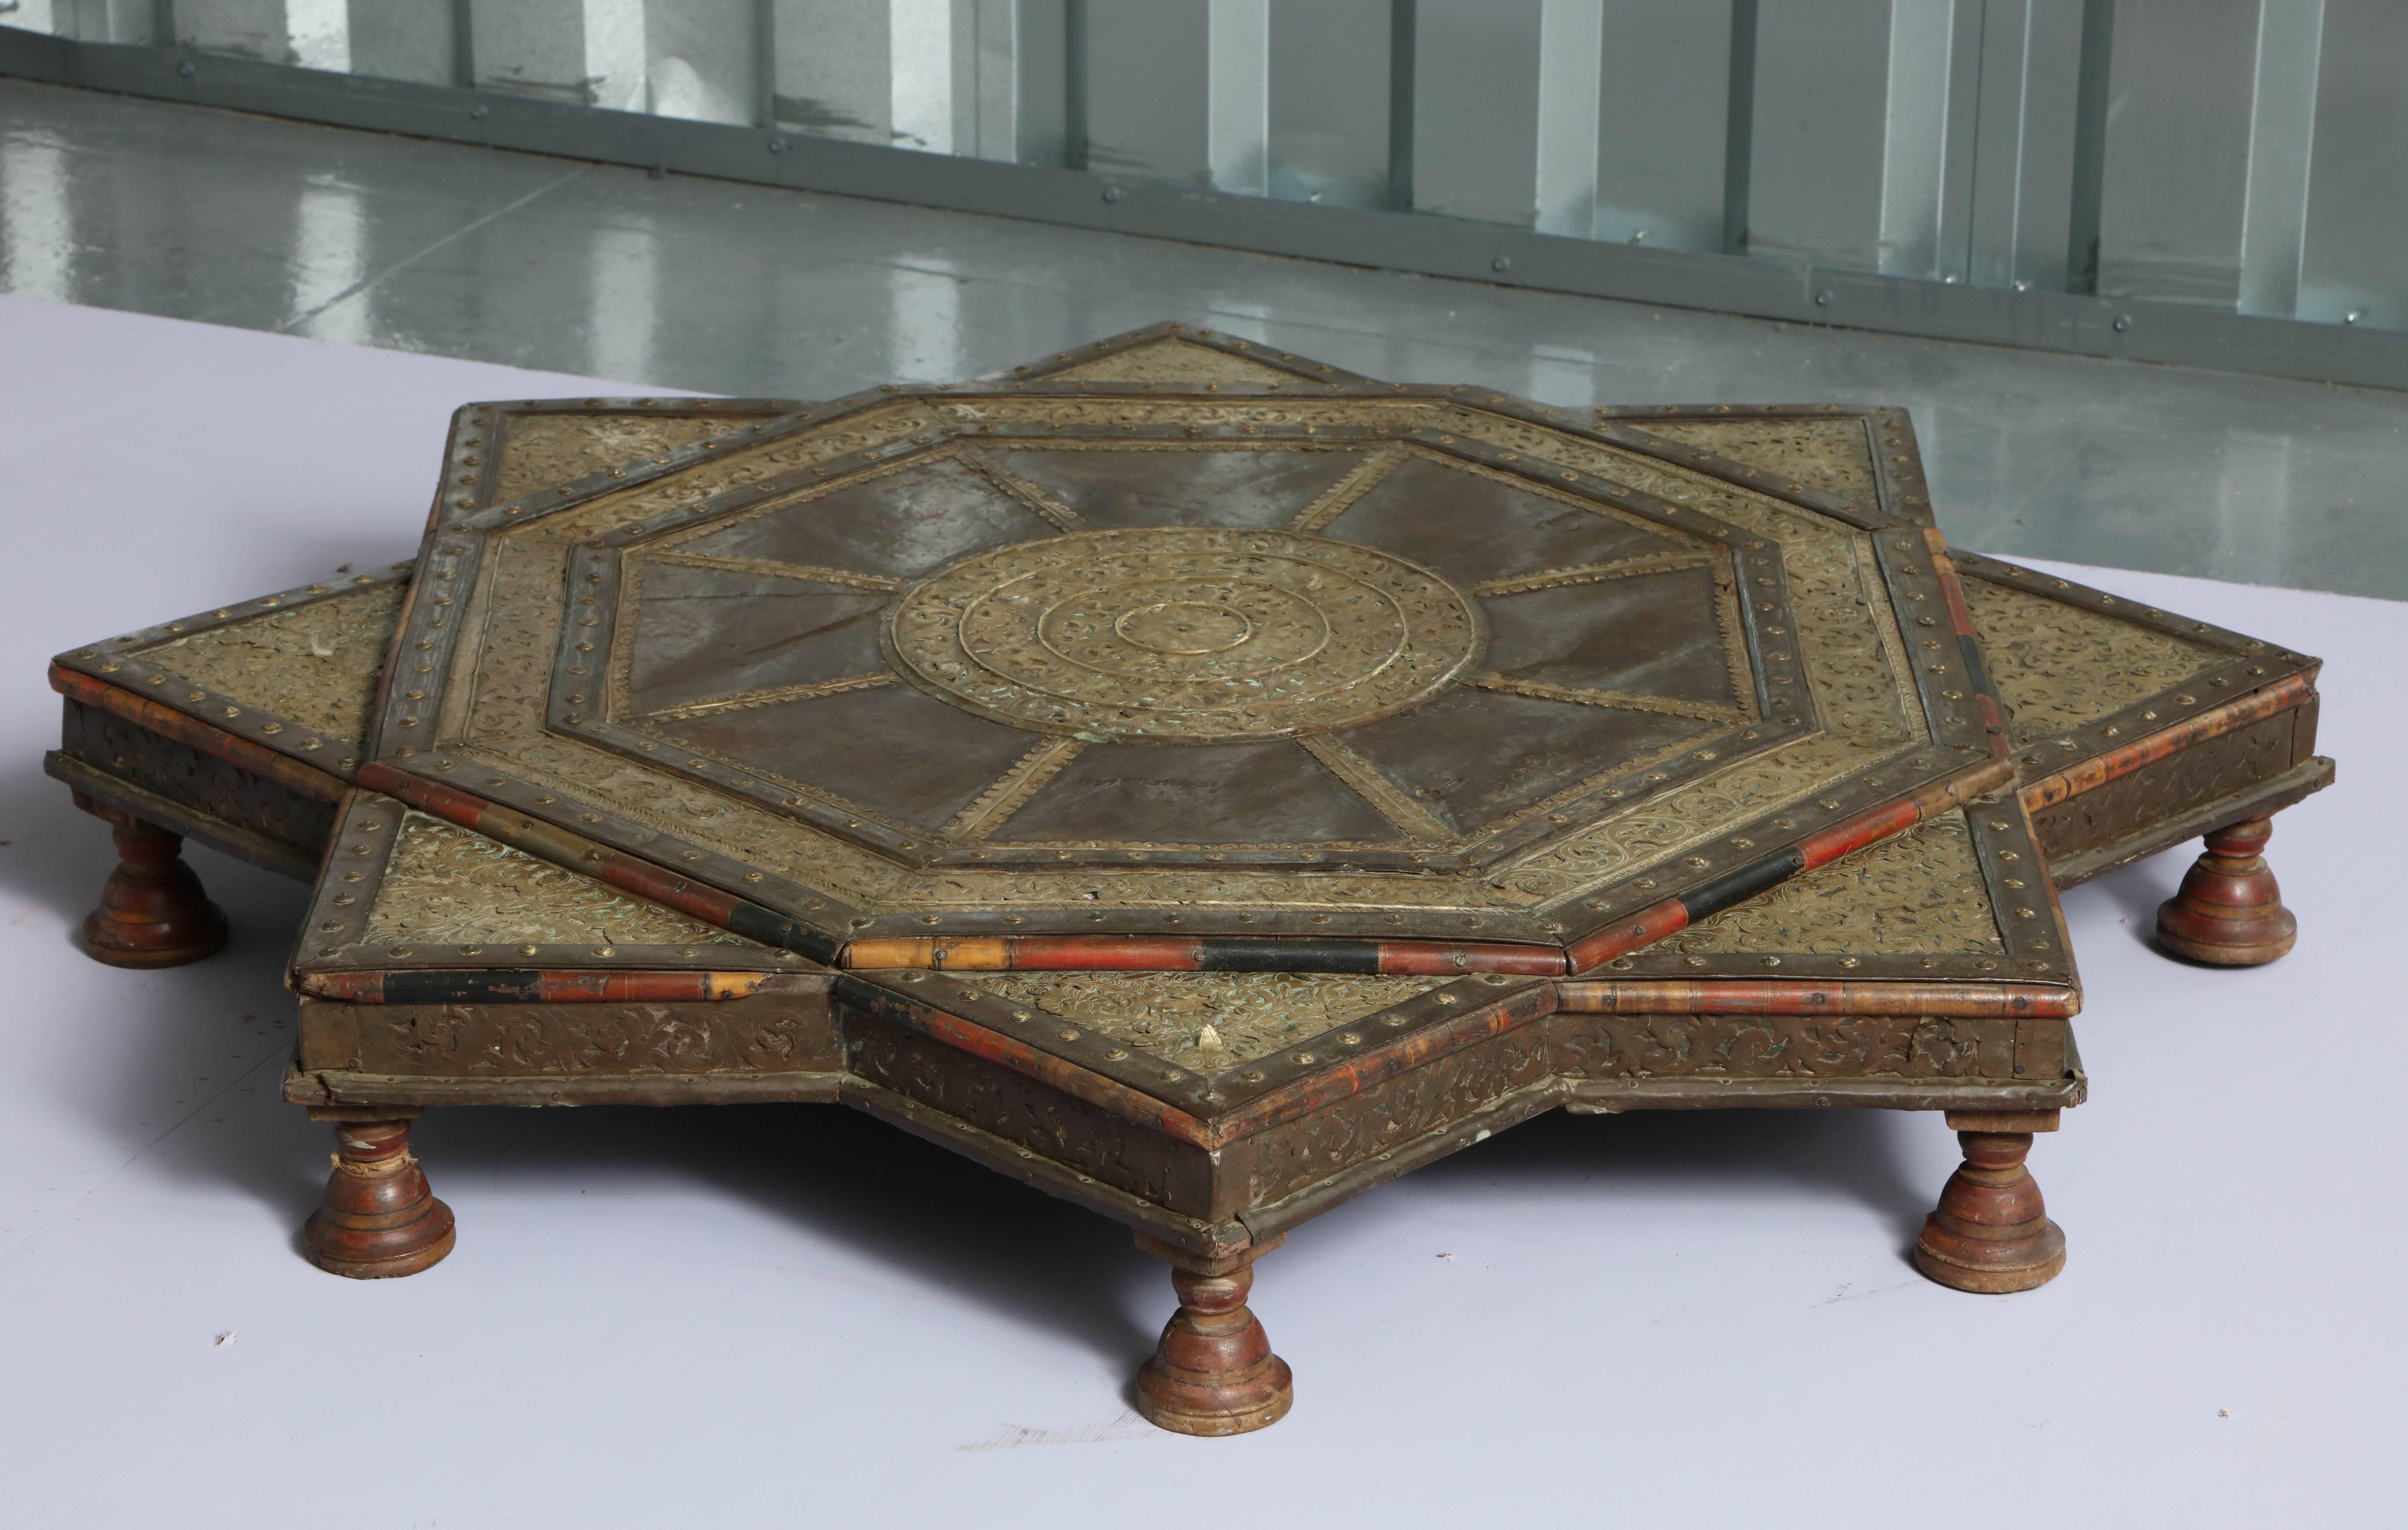 Most unusual Kashmiri low table in the form of an octagonal star or octagram, the patinated steel top bound with filigree brass trimming, having polychrome bamboo edging, brass and iron stud work and standing on low turned painted feet, the whole